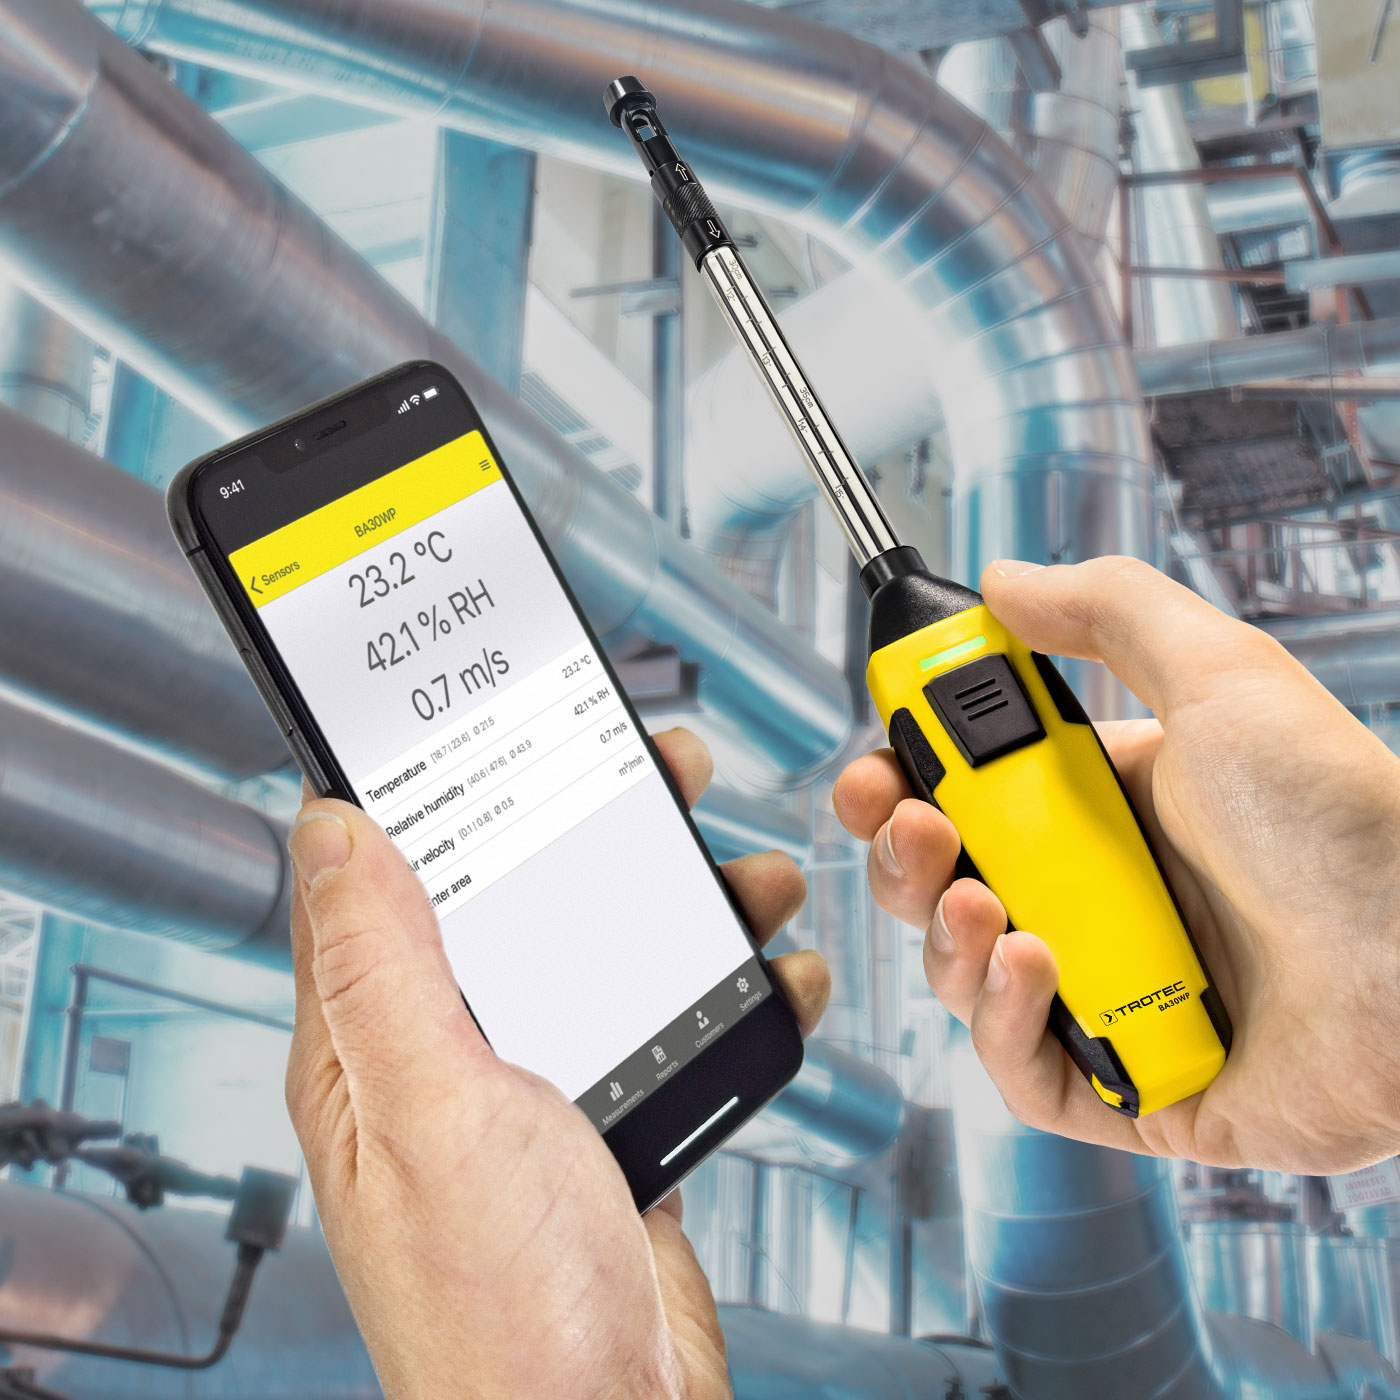 Hot-wire anemometer BA30WP as appSensor controlled via smartphone